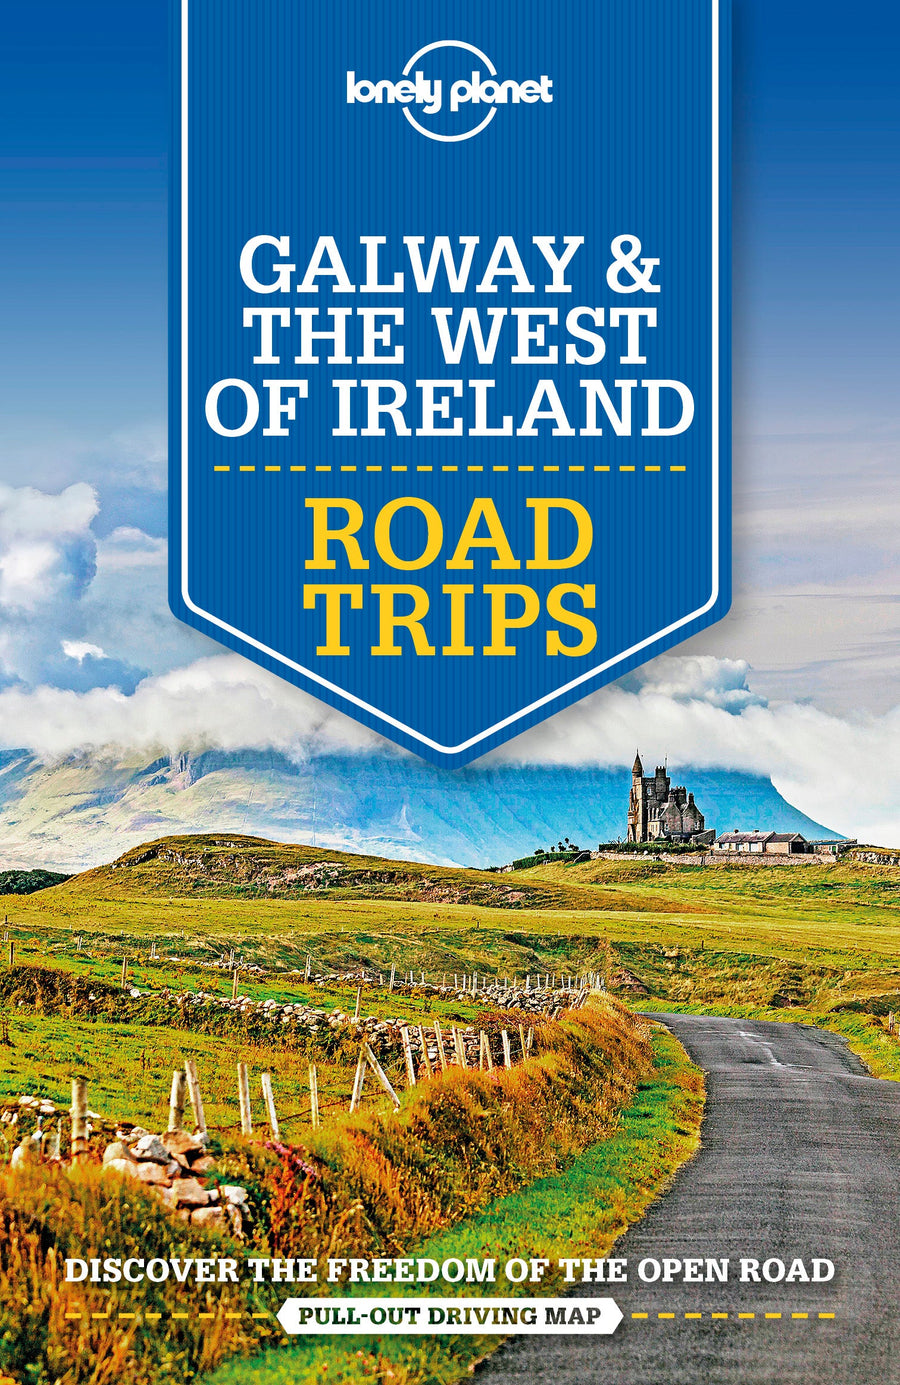 Road trip (en anglais) - Galway & the West of Ireland | Lonely Planet guide de voyage Lonely Planet 